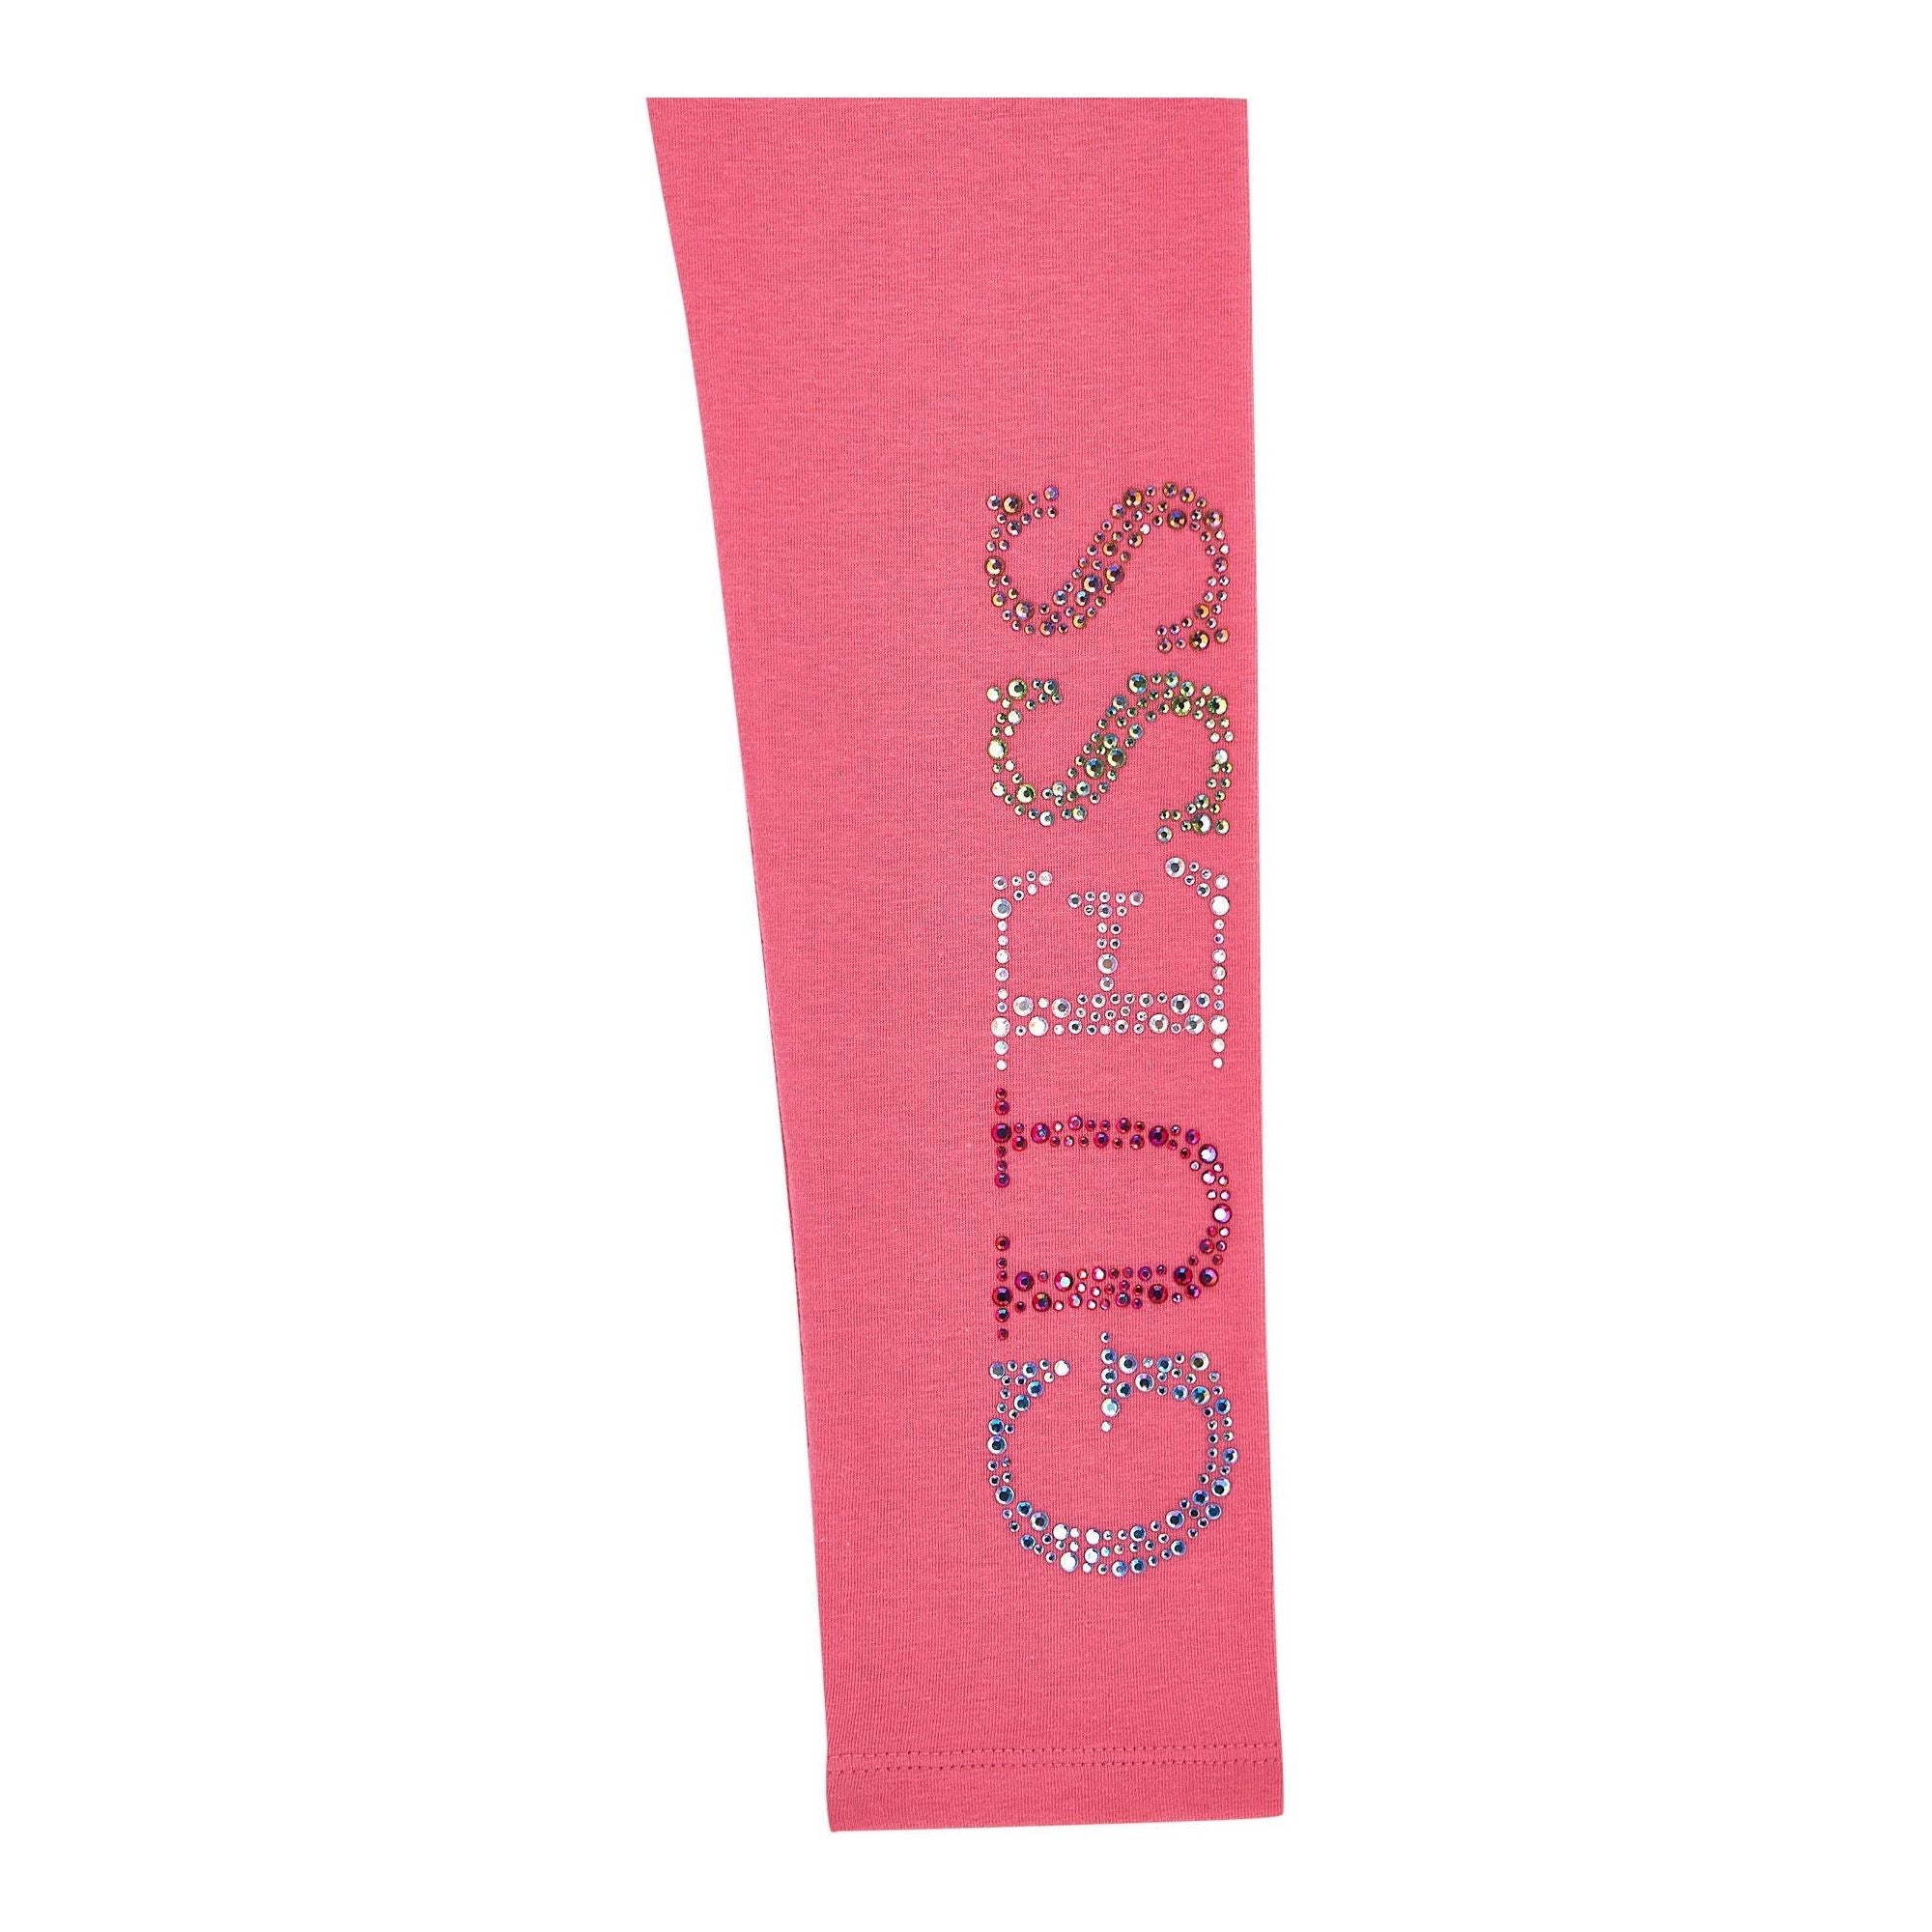 Guess - Girls Legging in Scared Pink